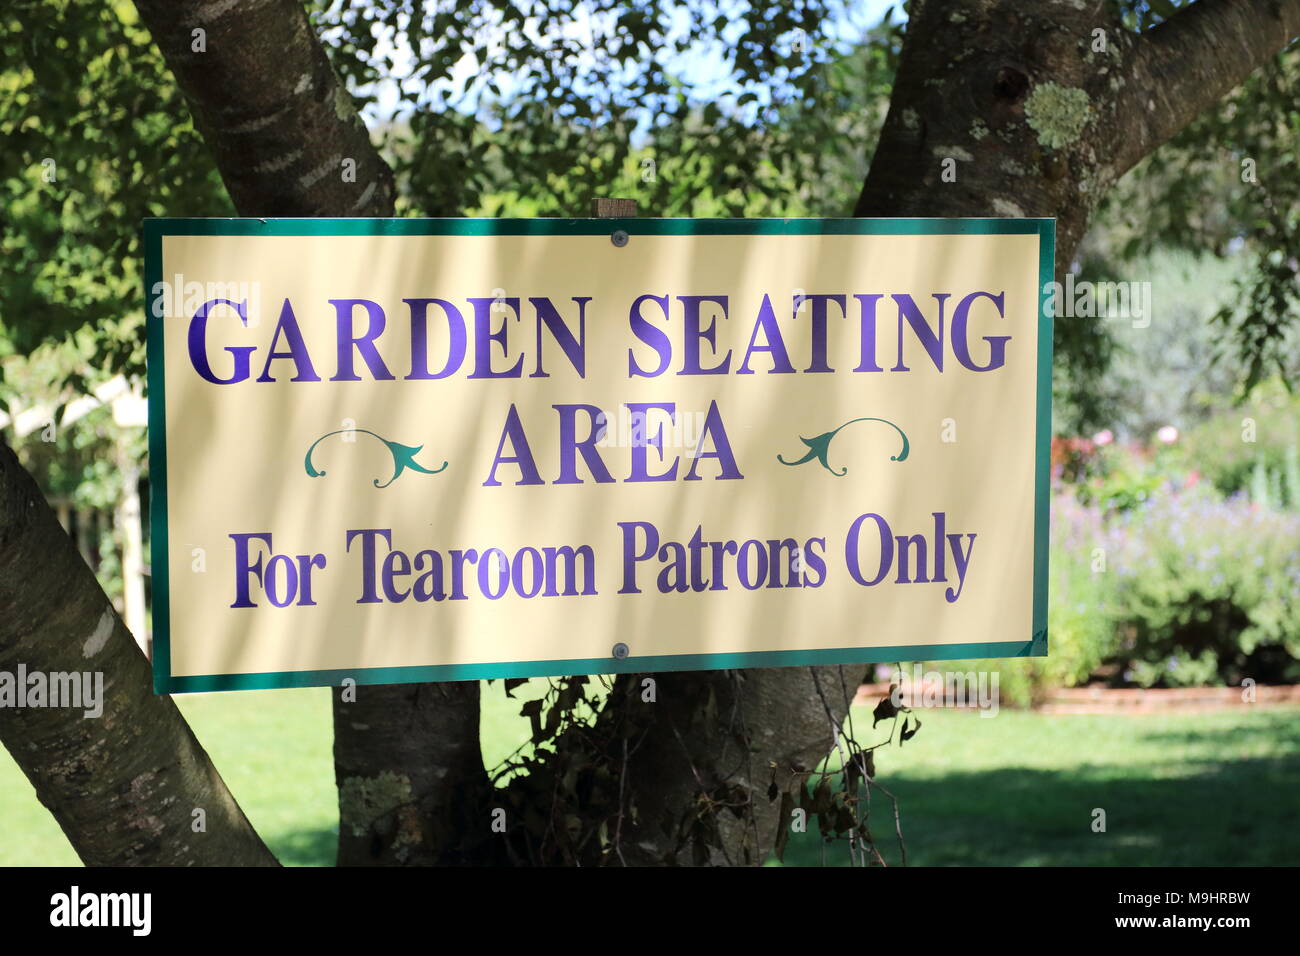 Garden Seating Area signboard under the tree Stock Photo